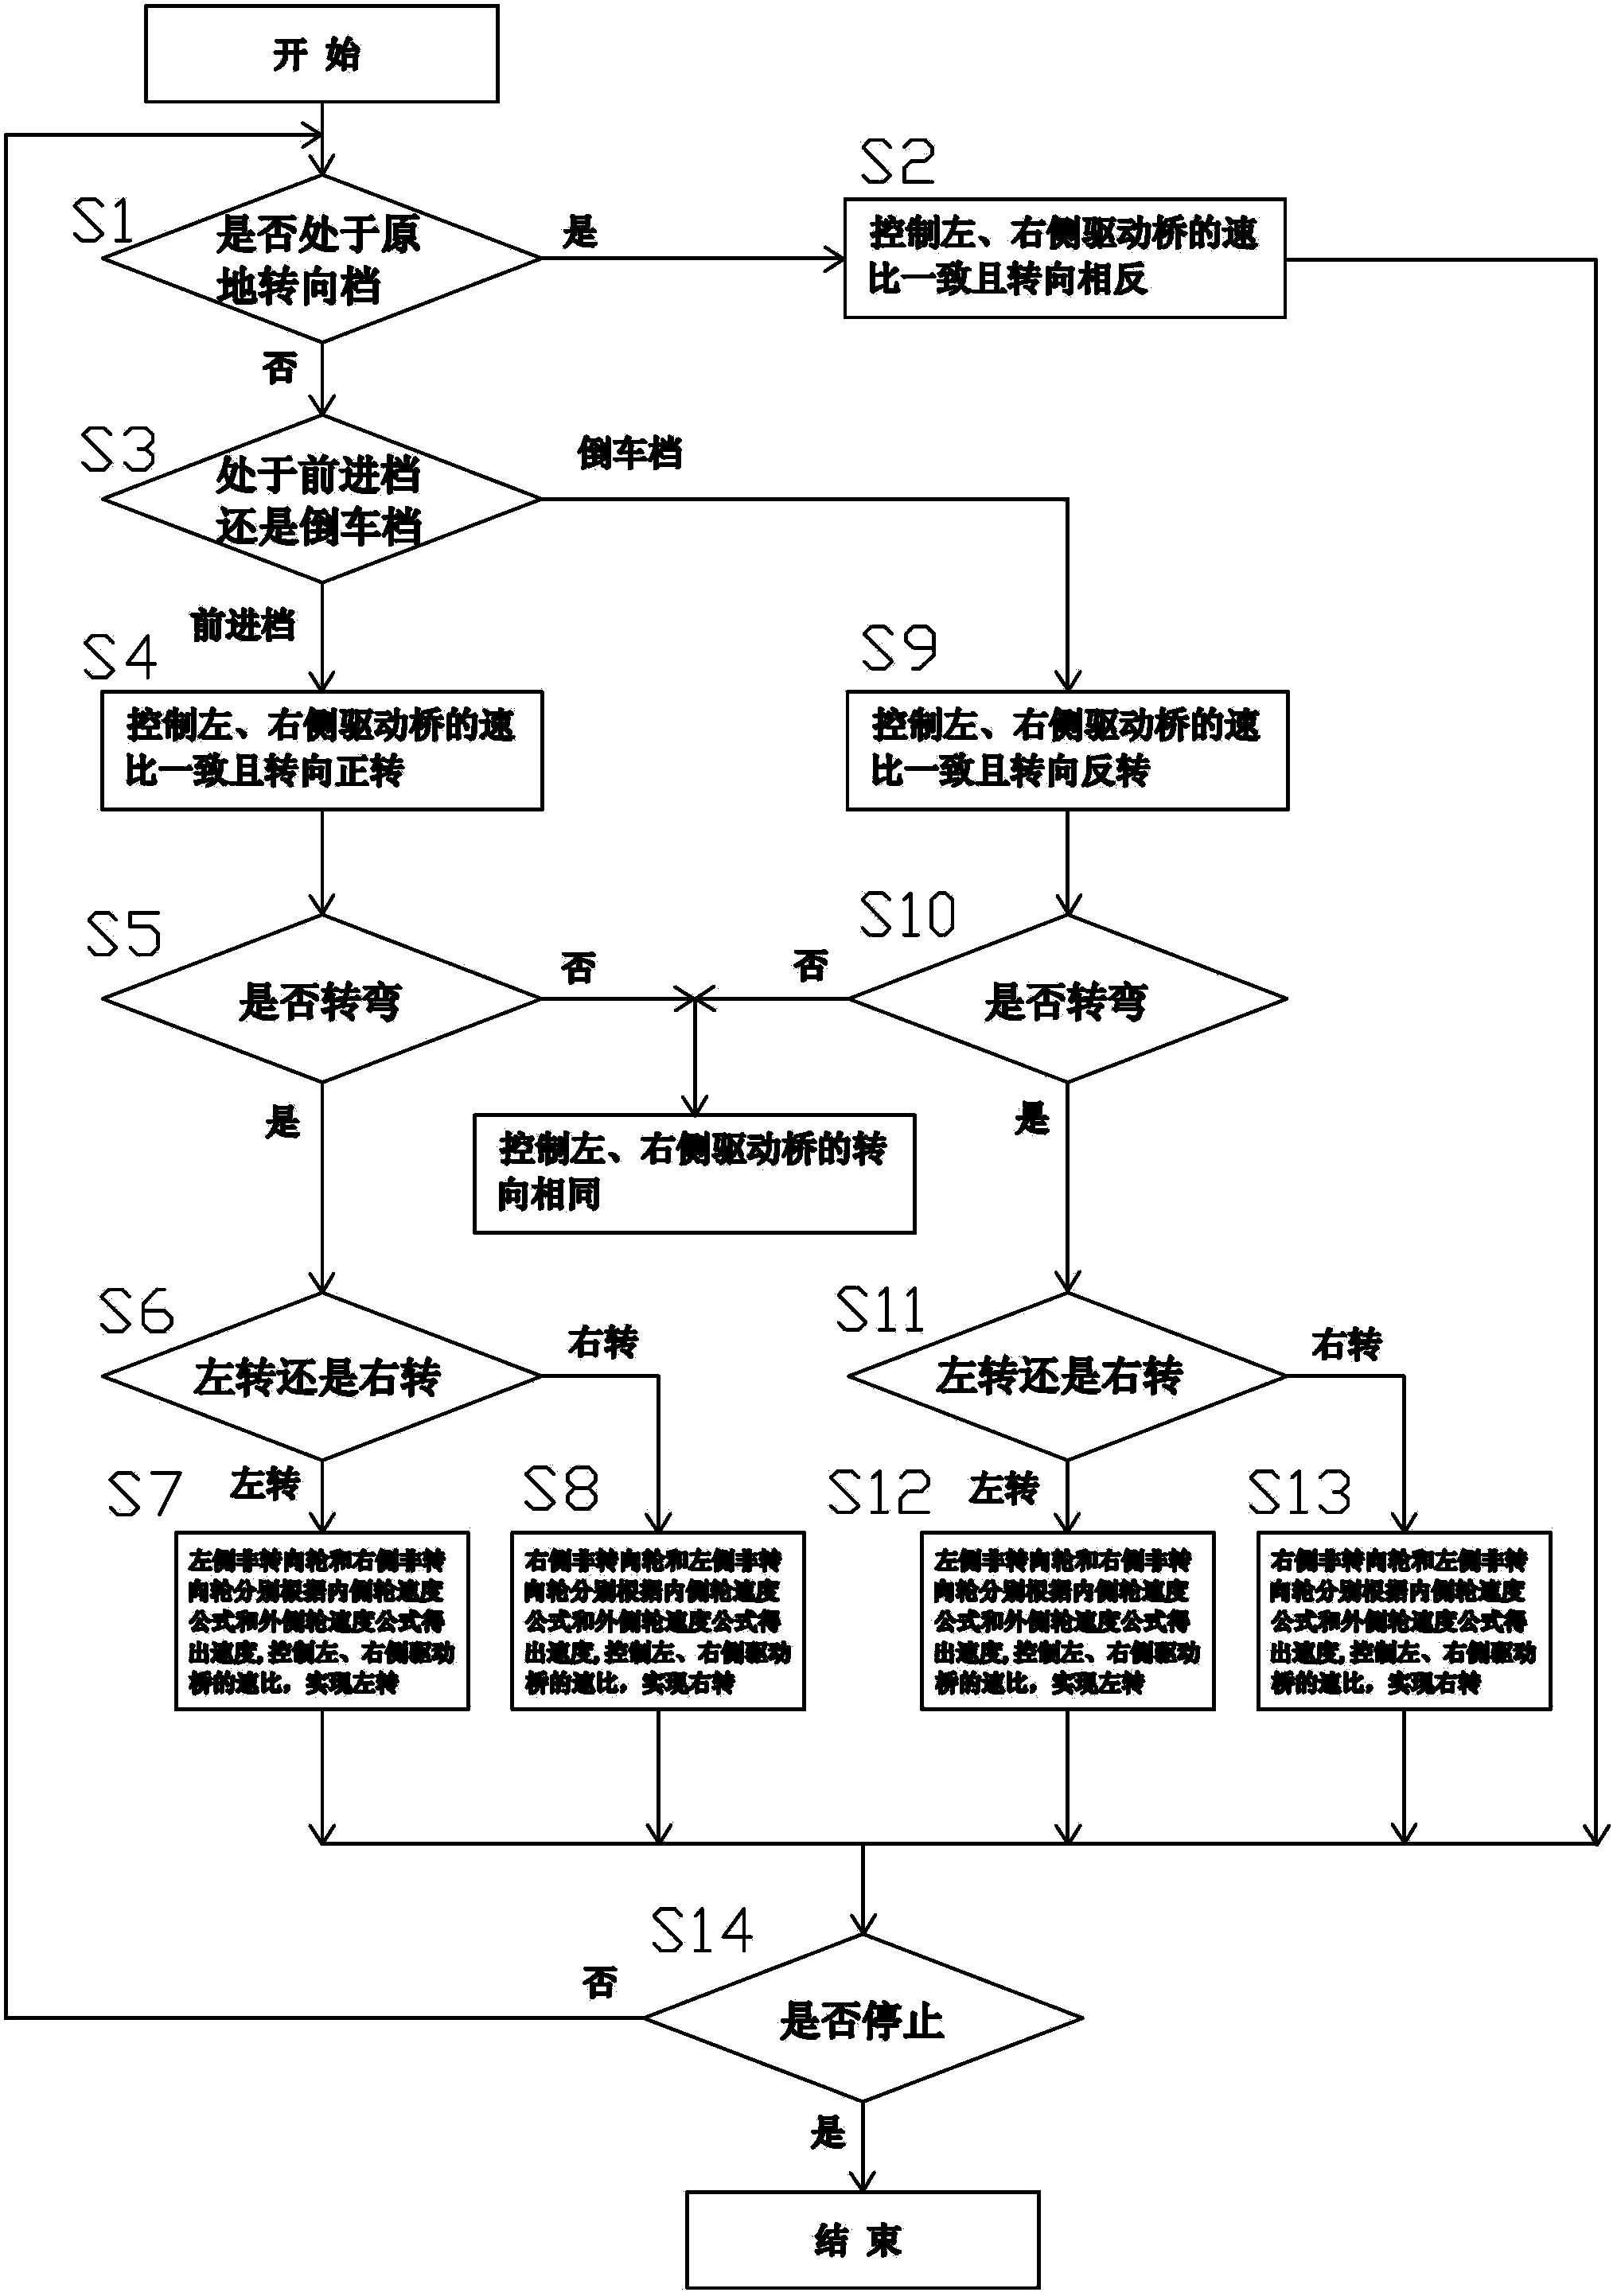 Steering automation operating system and control method for a dual-drive non-steering wheel vehicle